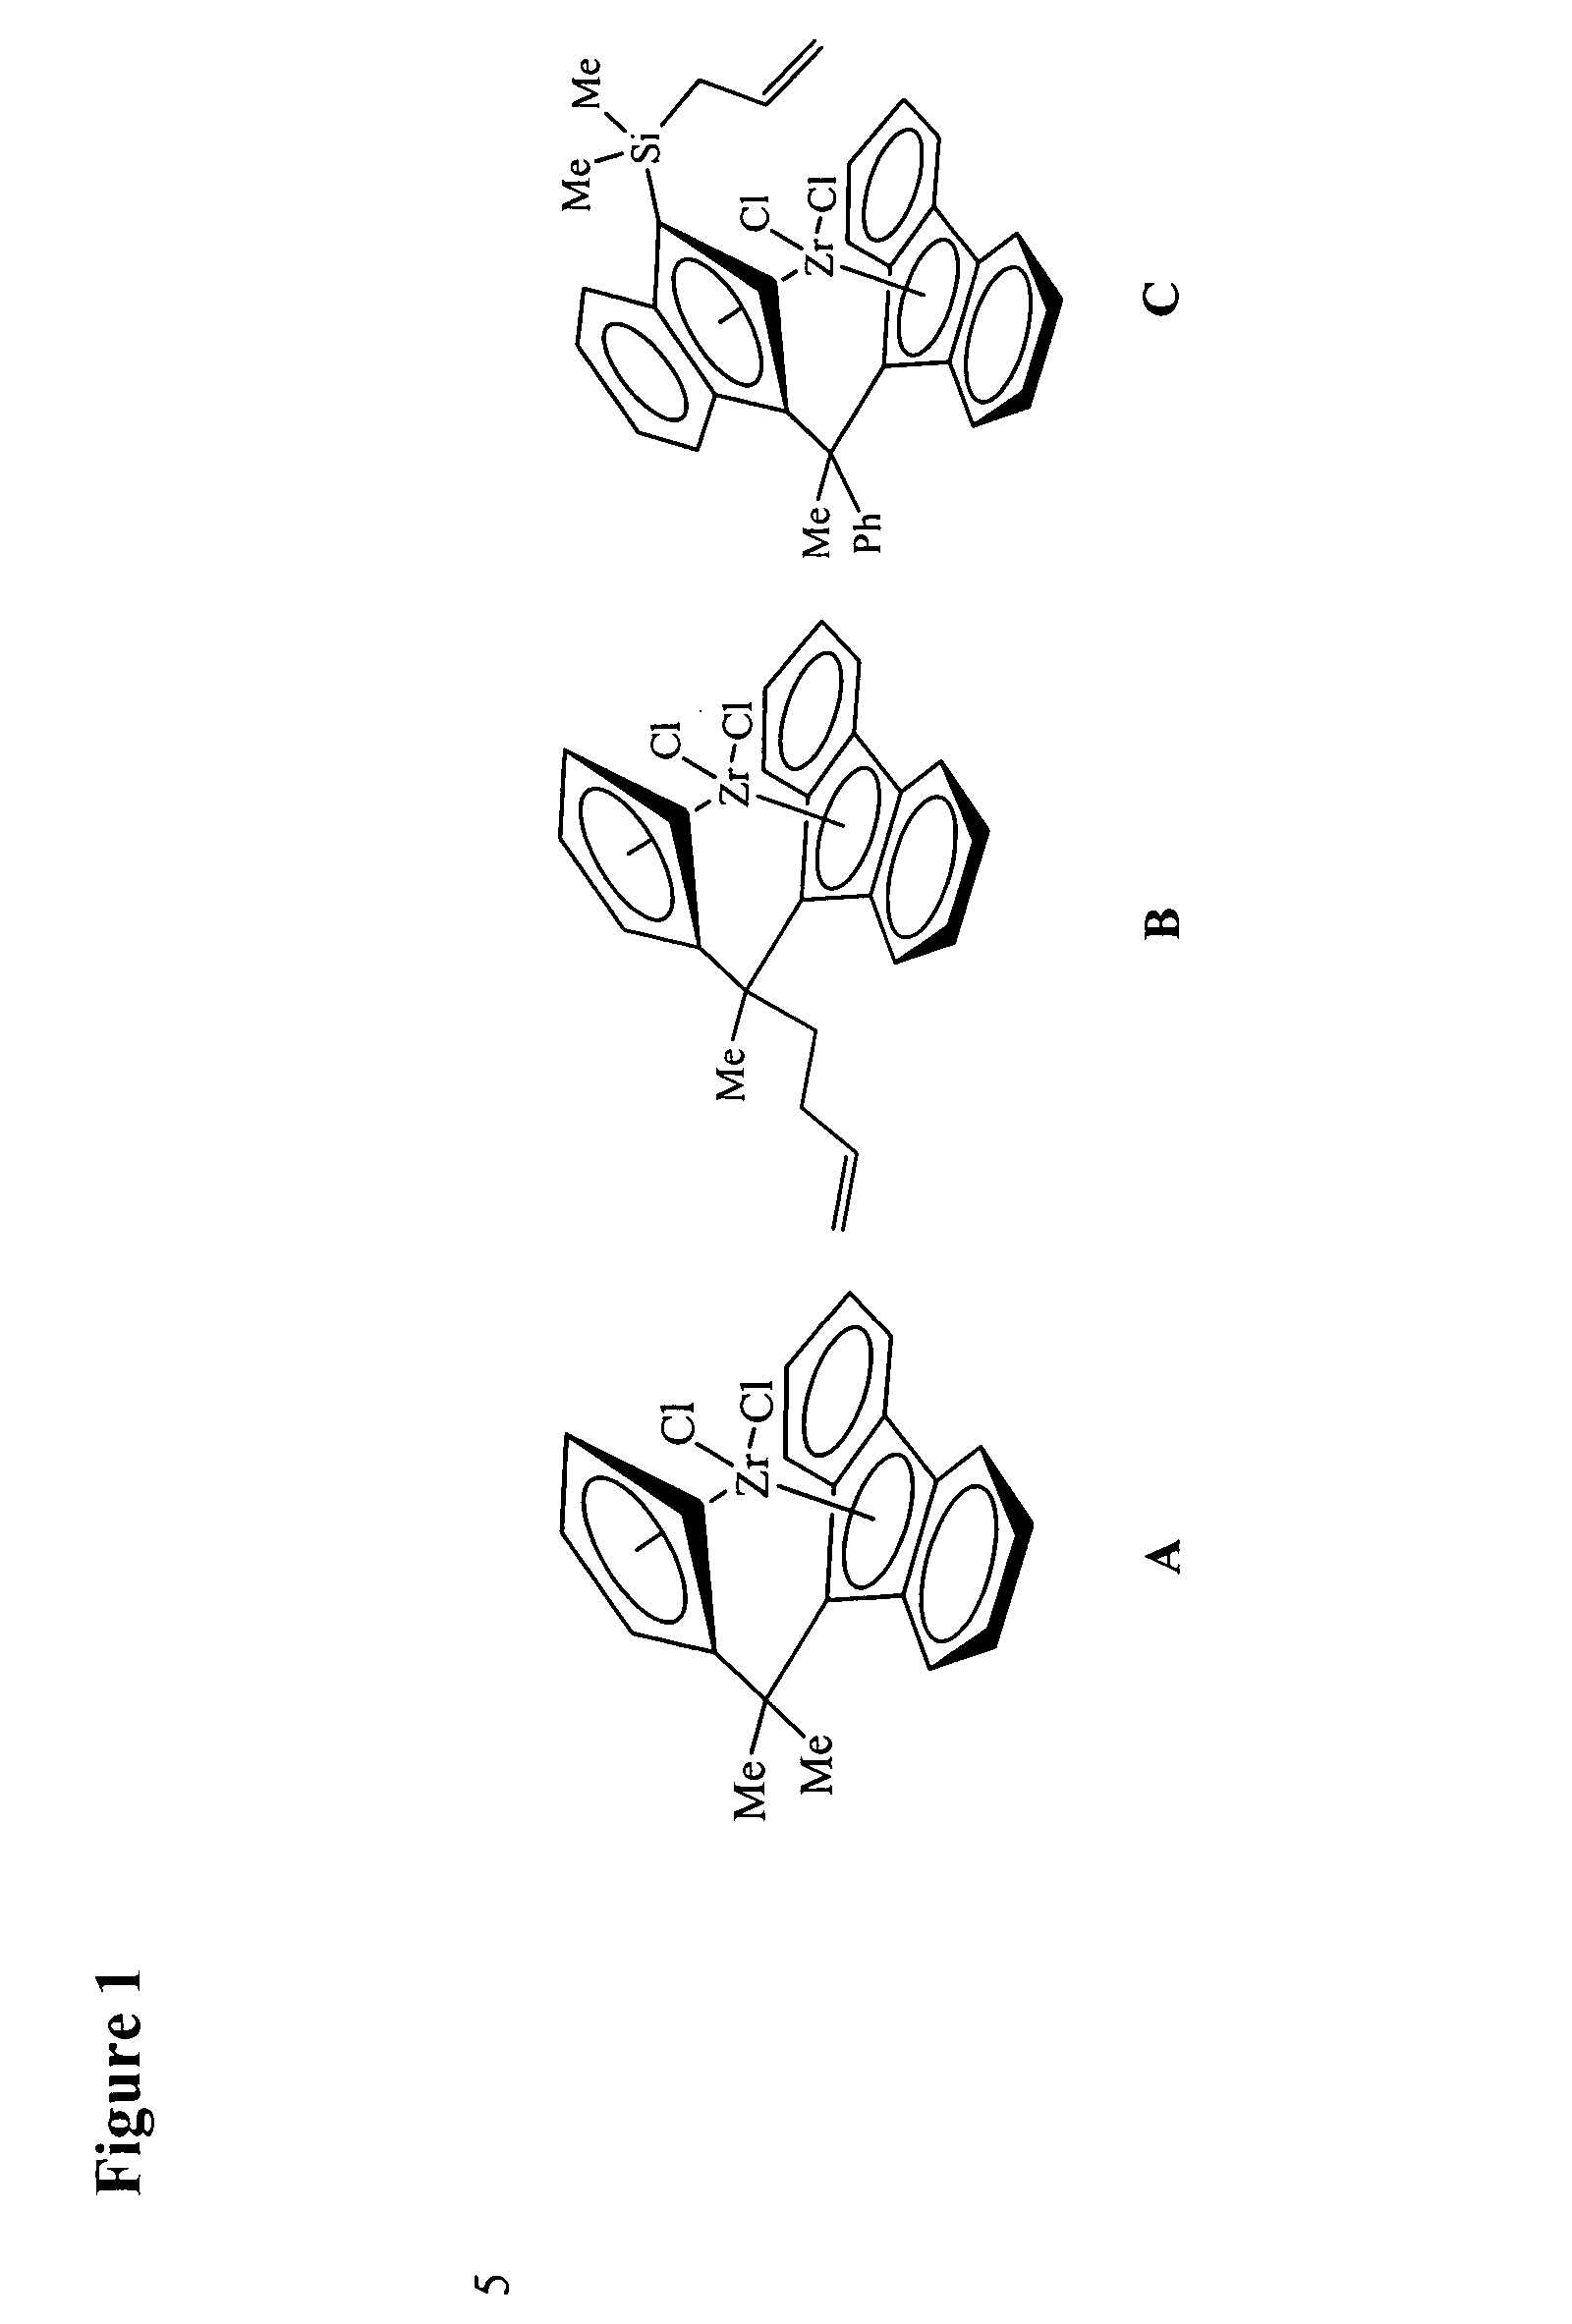 Polymerization catalysts for producing polymers with low levels of long chain branching